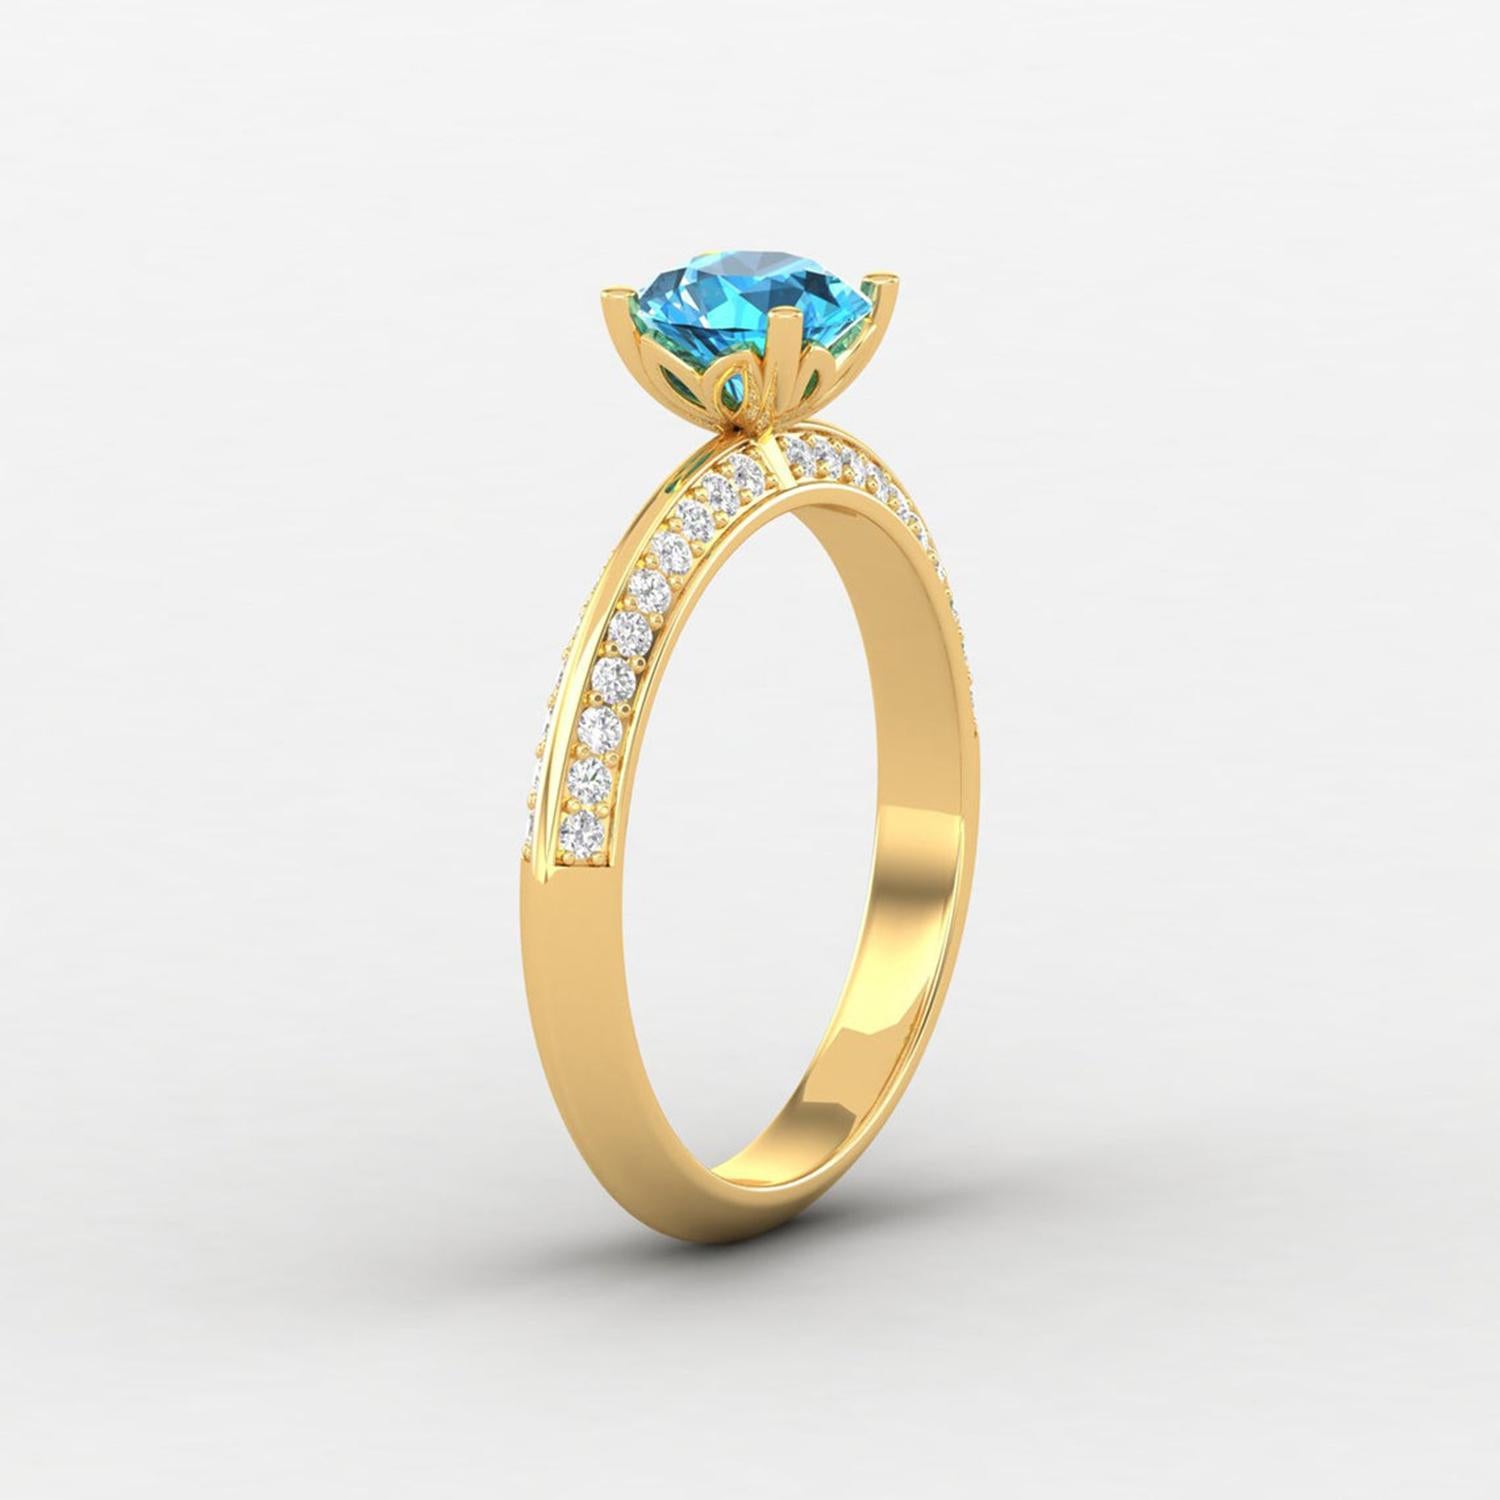 Round Cut 14 karat Gold Swiss Blue Topaz Ring / Diamond Solitaire Ring / Ring for Her For Sale